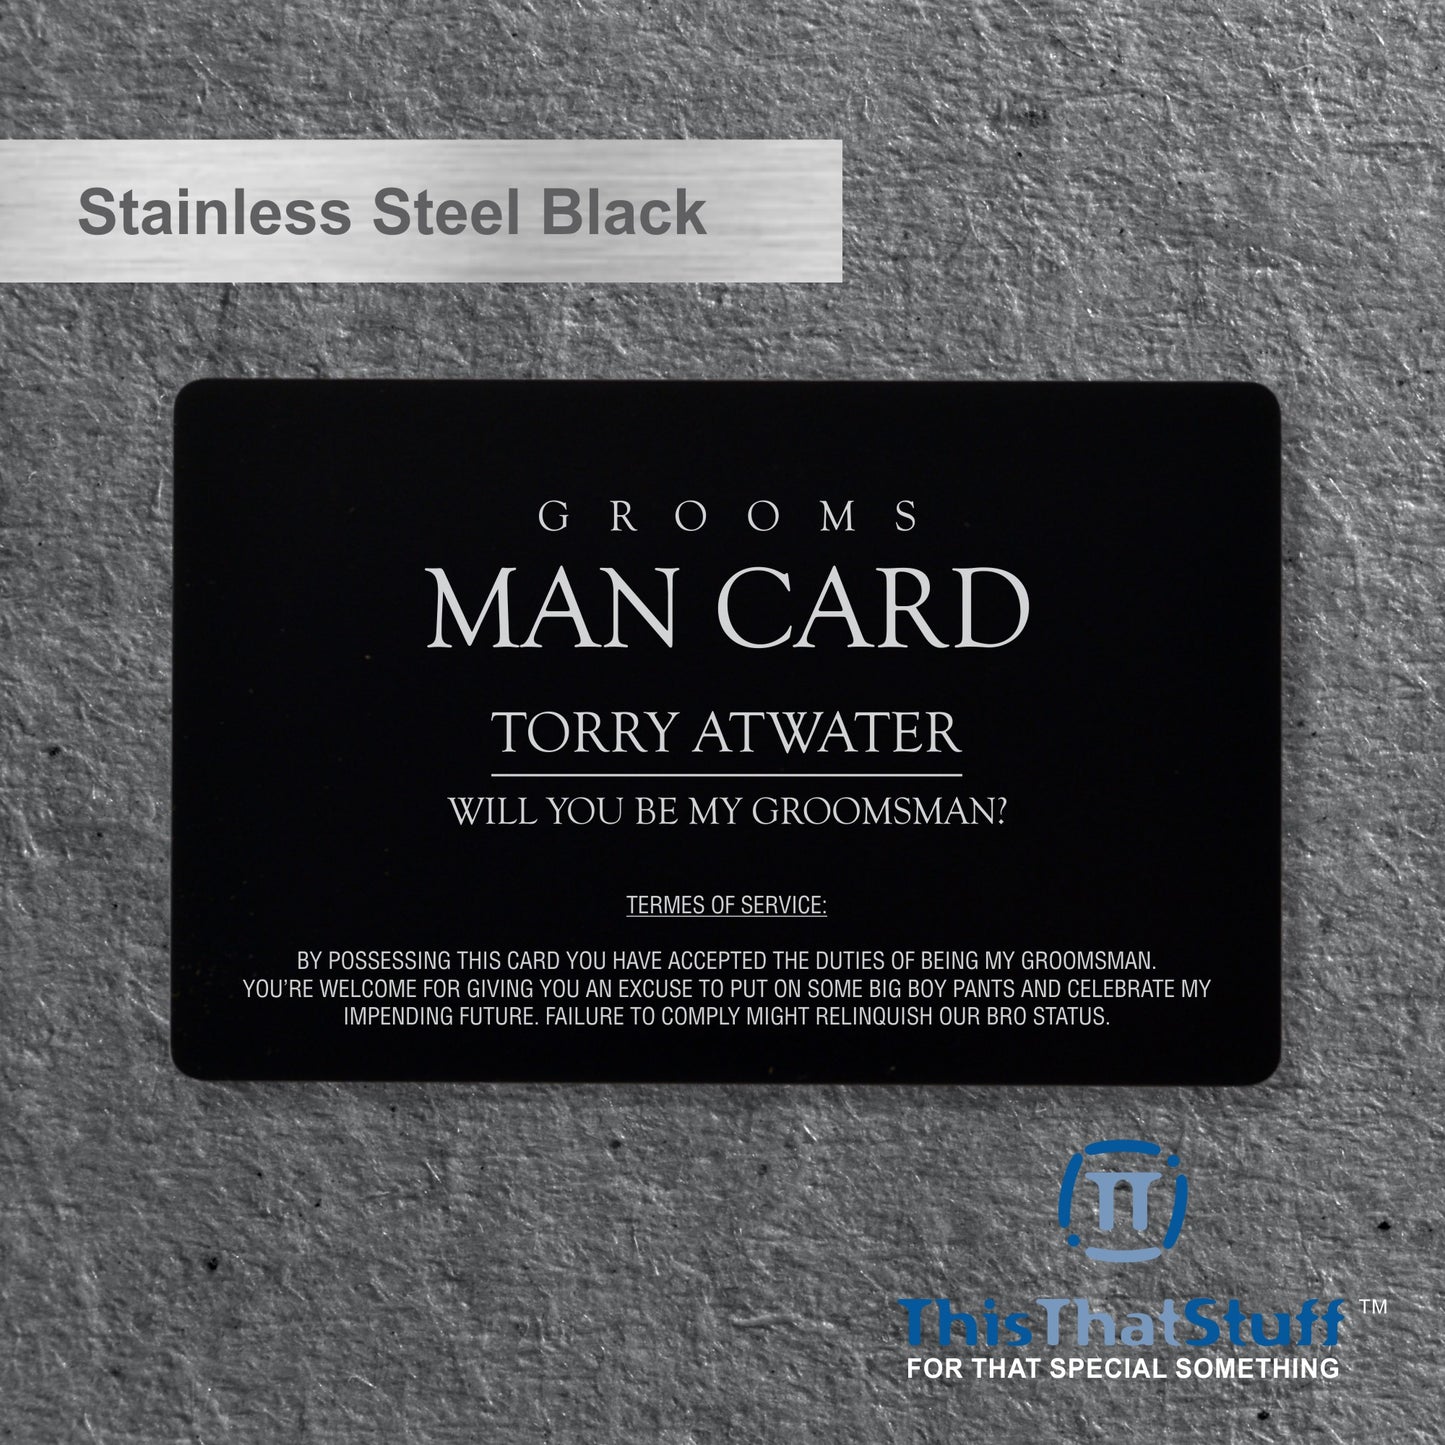 Stainless Steel Business Cards - Membership or VIP Metal Cards for any Luxury event - Quick & Easy to order with fast turnaround